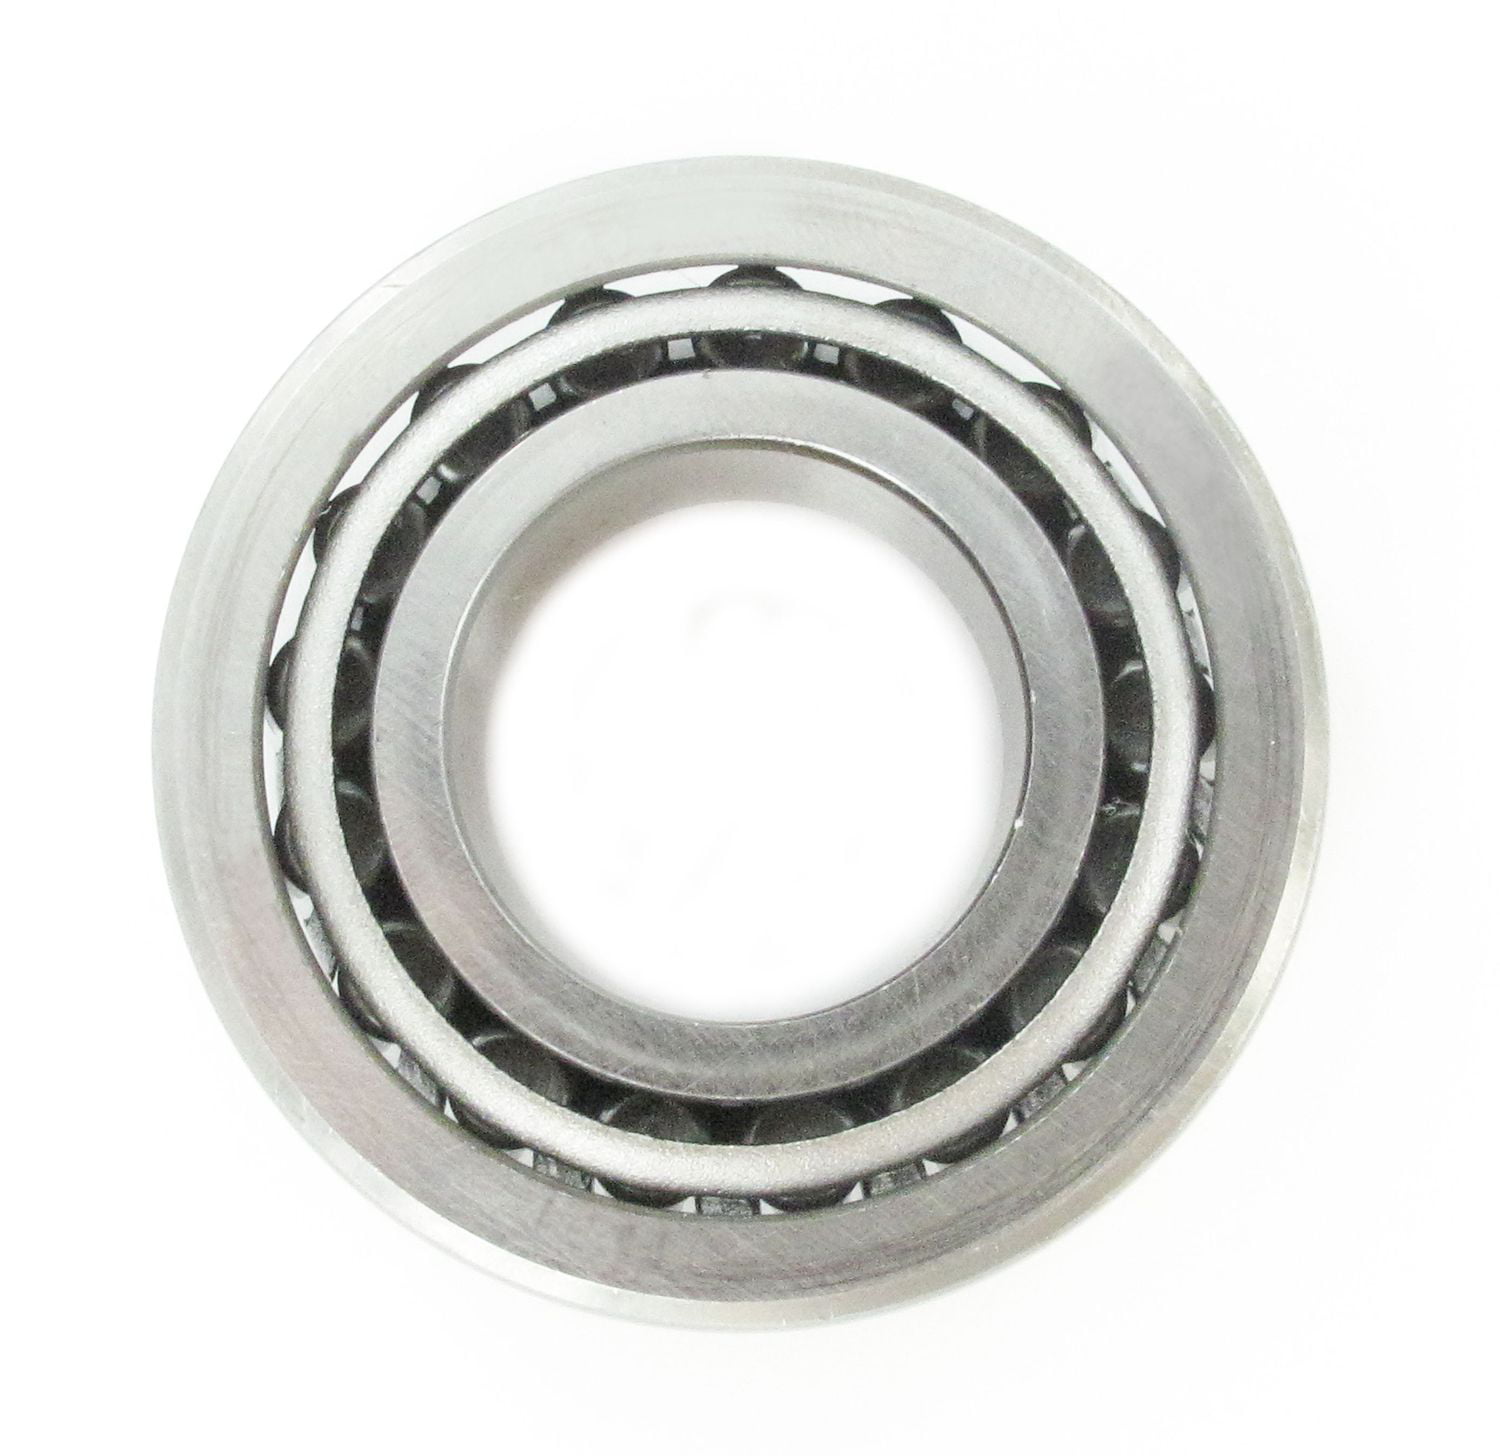 Stainless Steel SKF Ball Bearing, Weight: 600 Gm